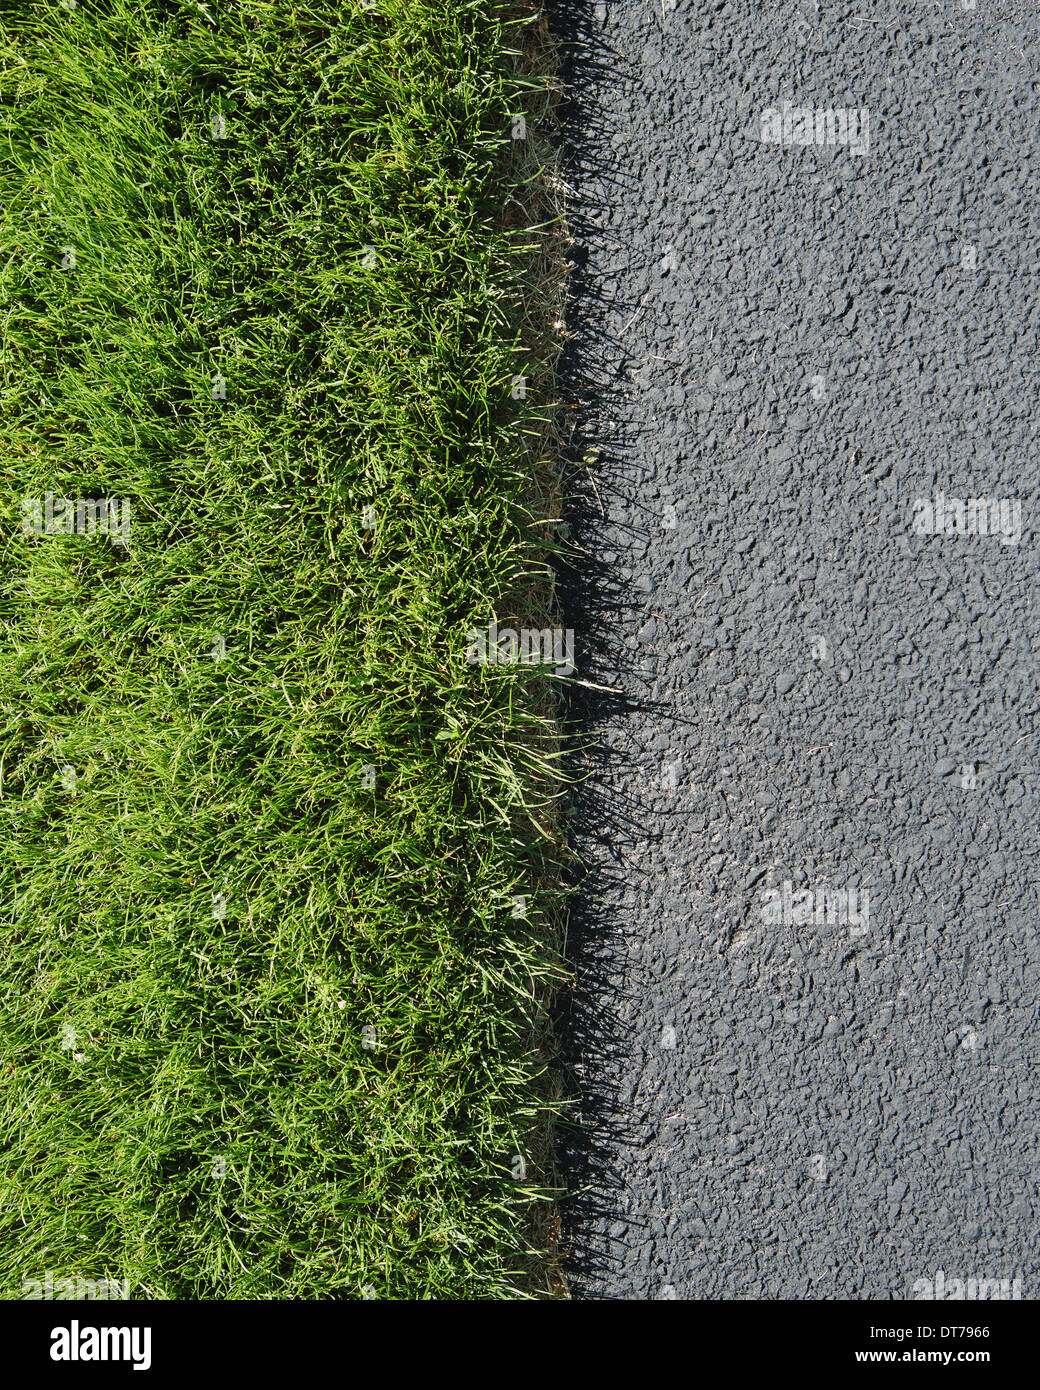 Detail of lush, green grass and sidewalk, near Quincy Stock Photo